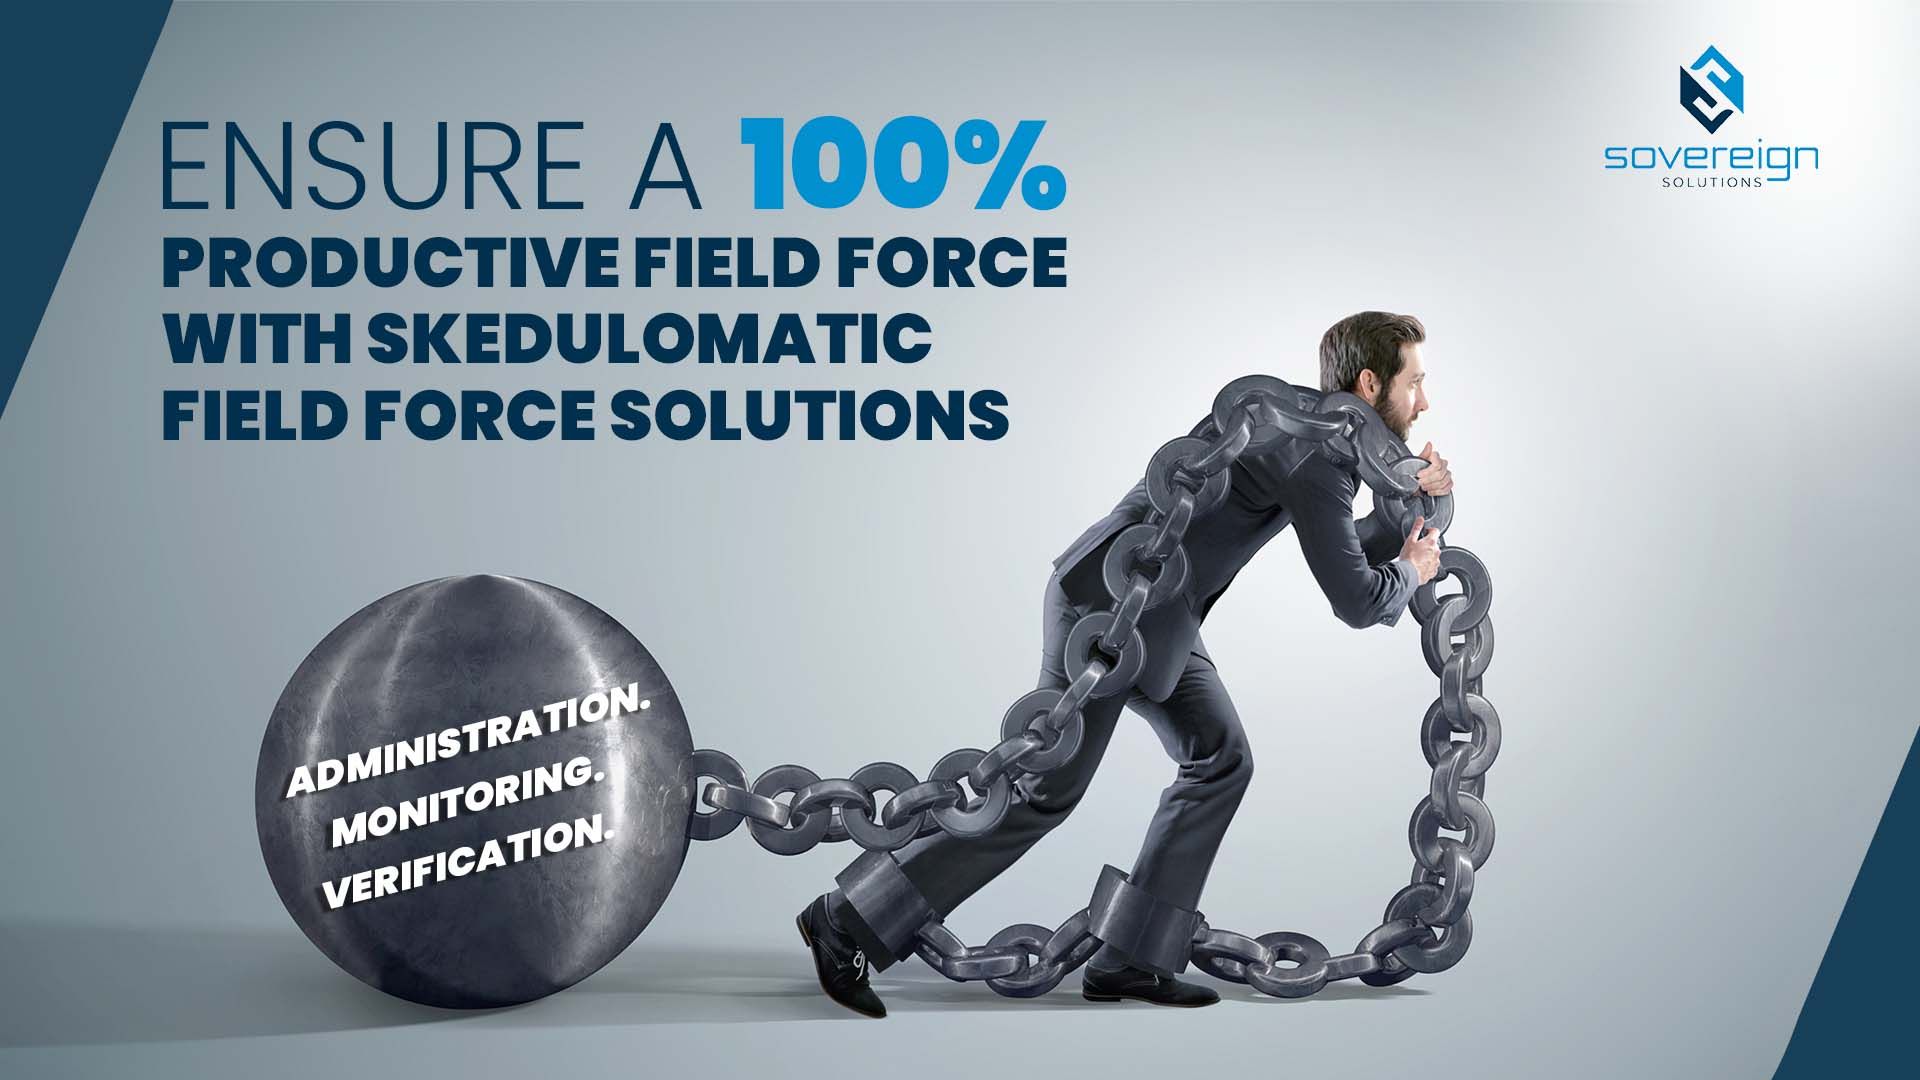 Ensure a 100% productive field force with Skedulomatic field force solutions